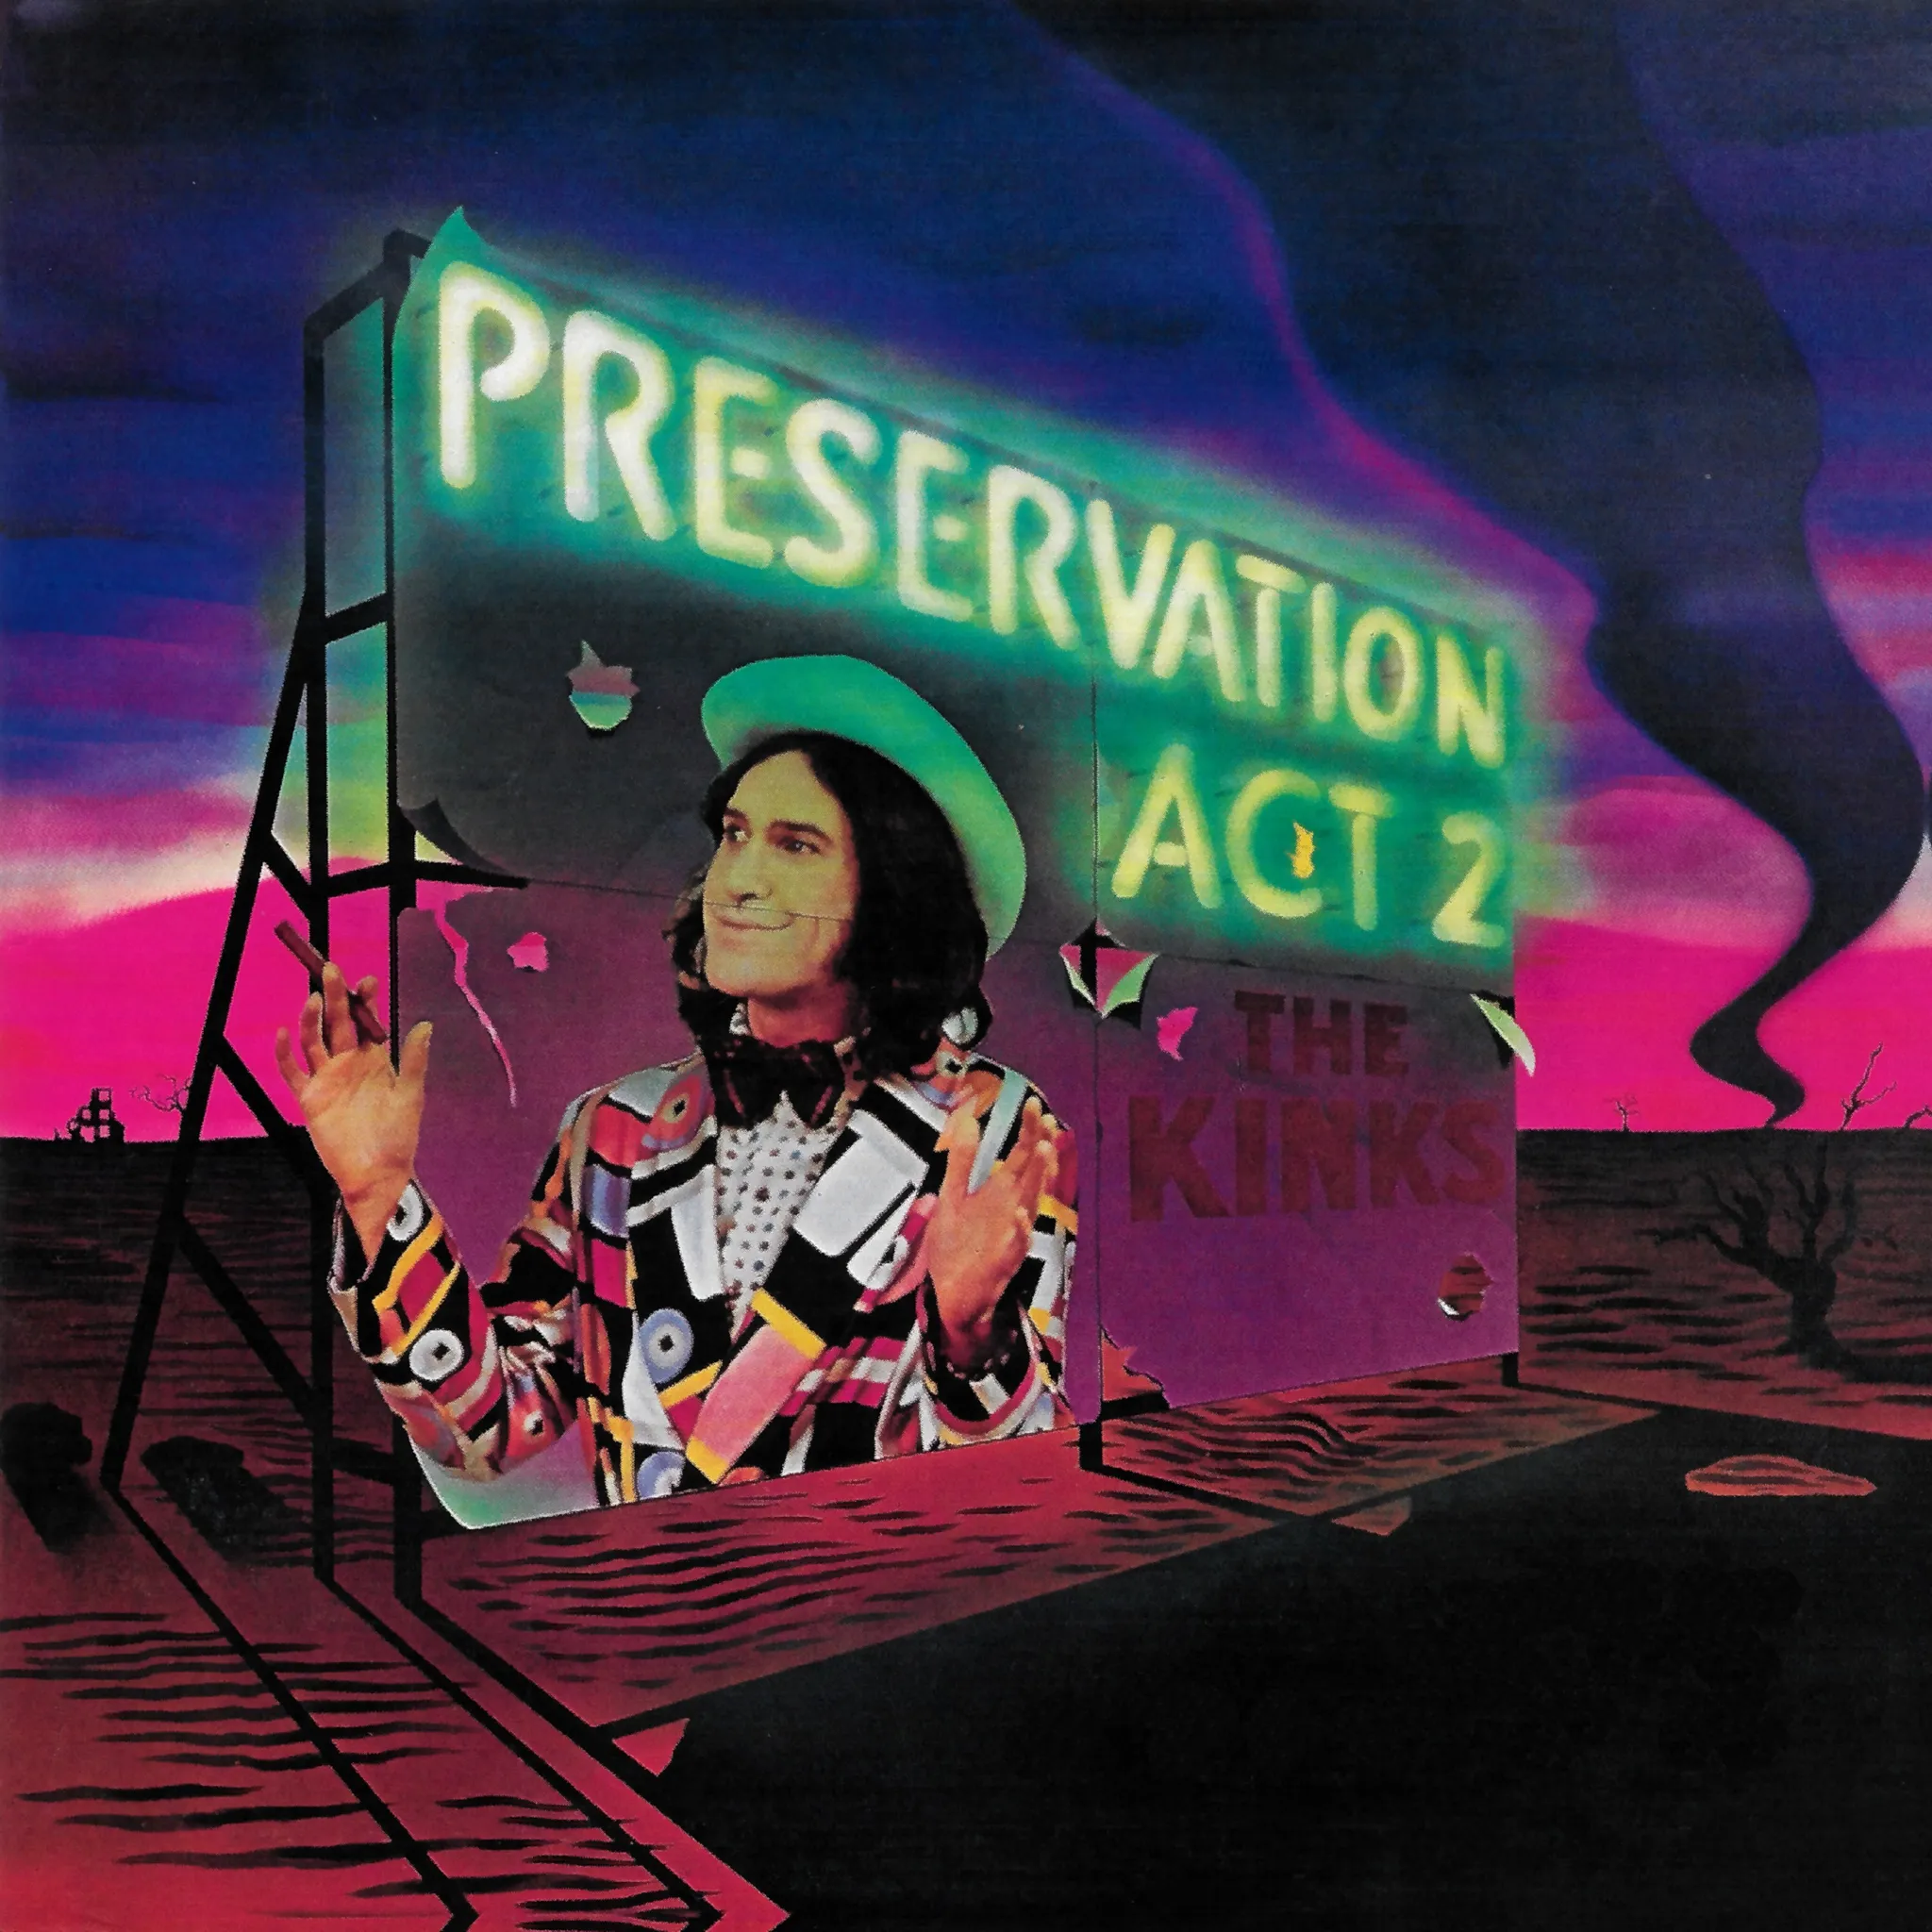 <strong>The Kinks - Preservation Act 2</strong> (Vinyl LP - black)